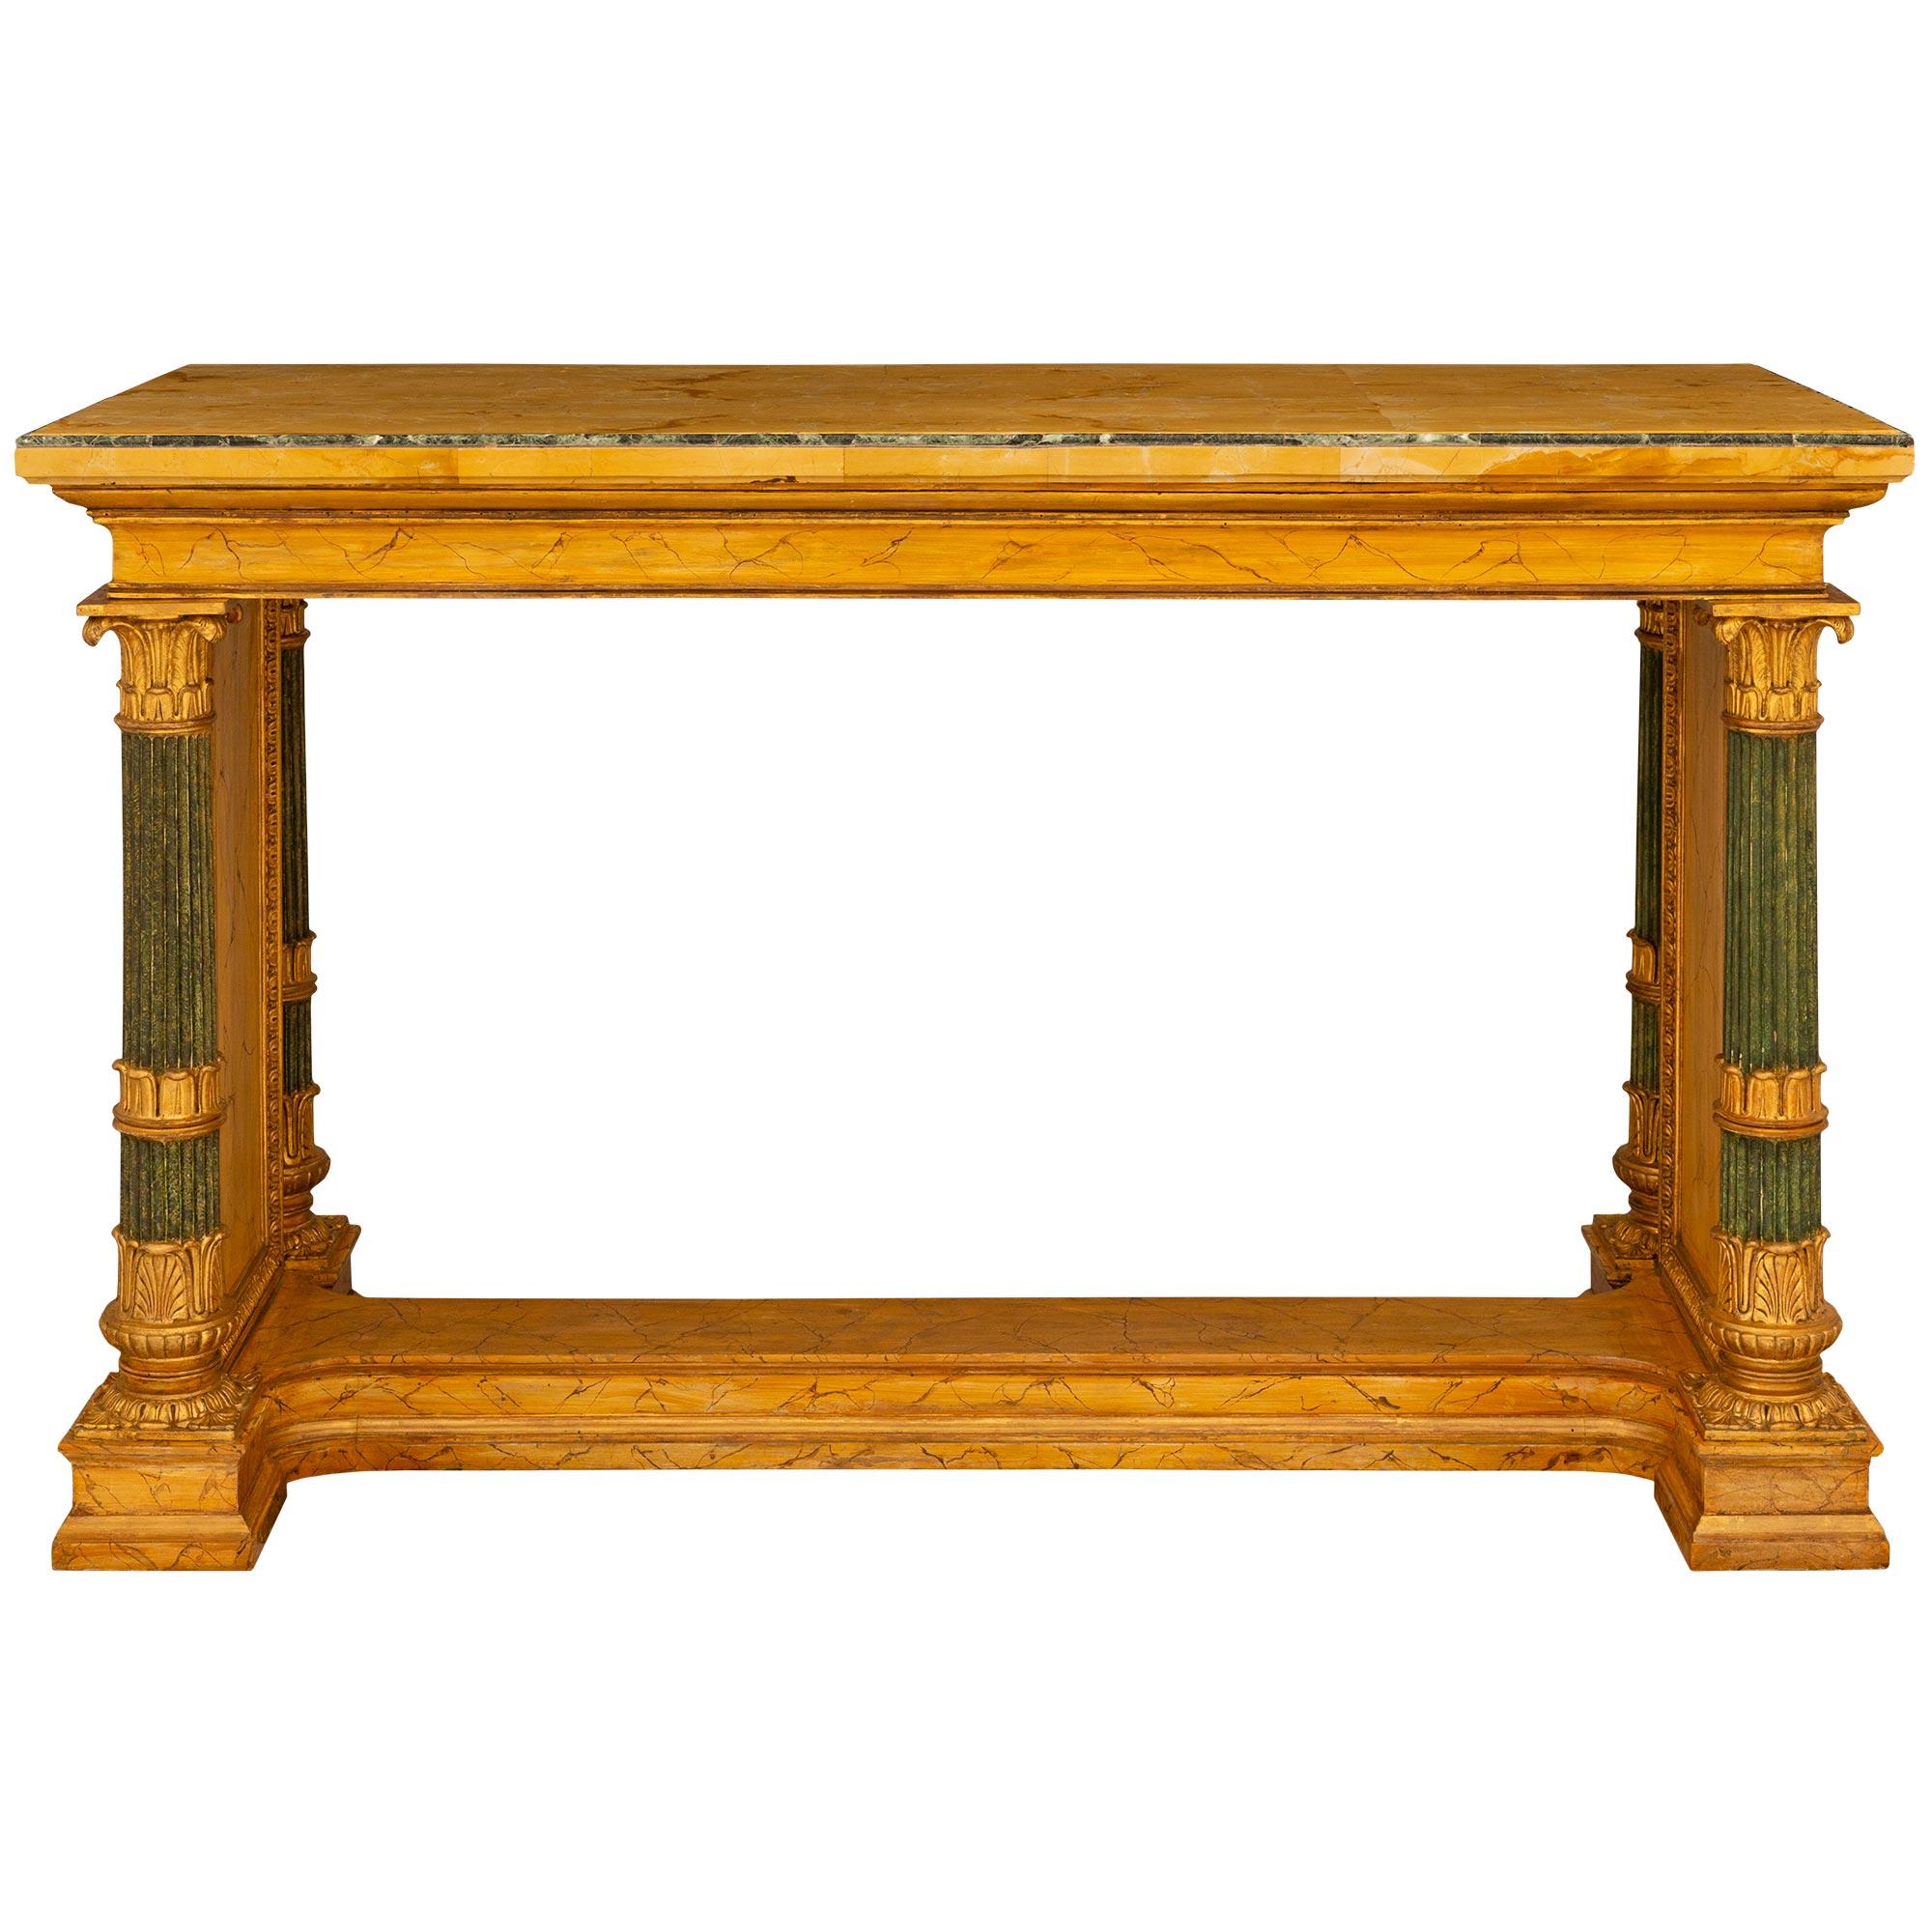 Italian 19th c. Neo-Classical St. Marble, Faux Marble, & Giltwood Center Table For Sale 3